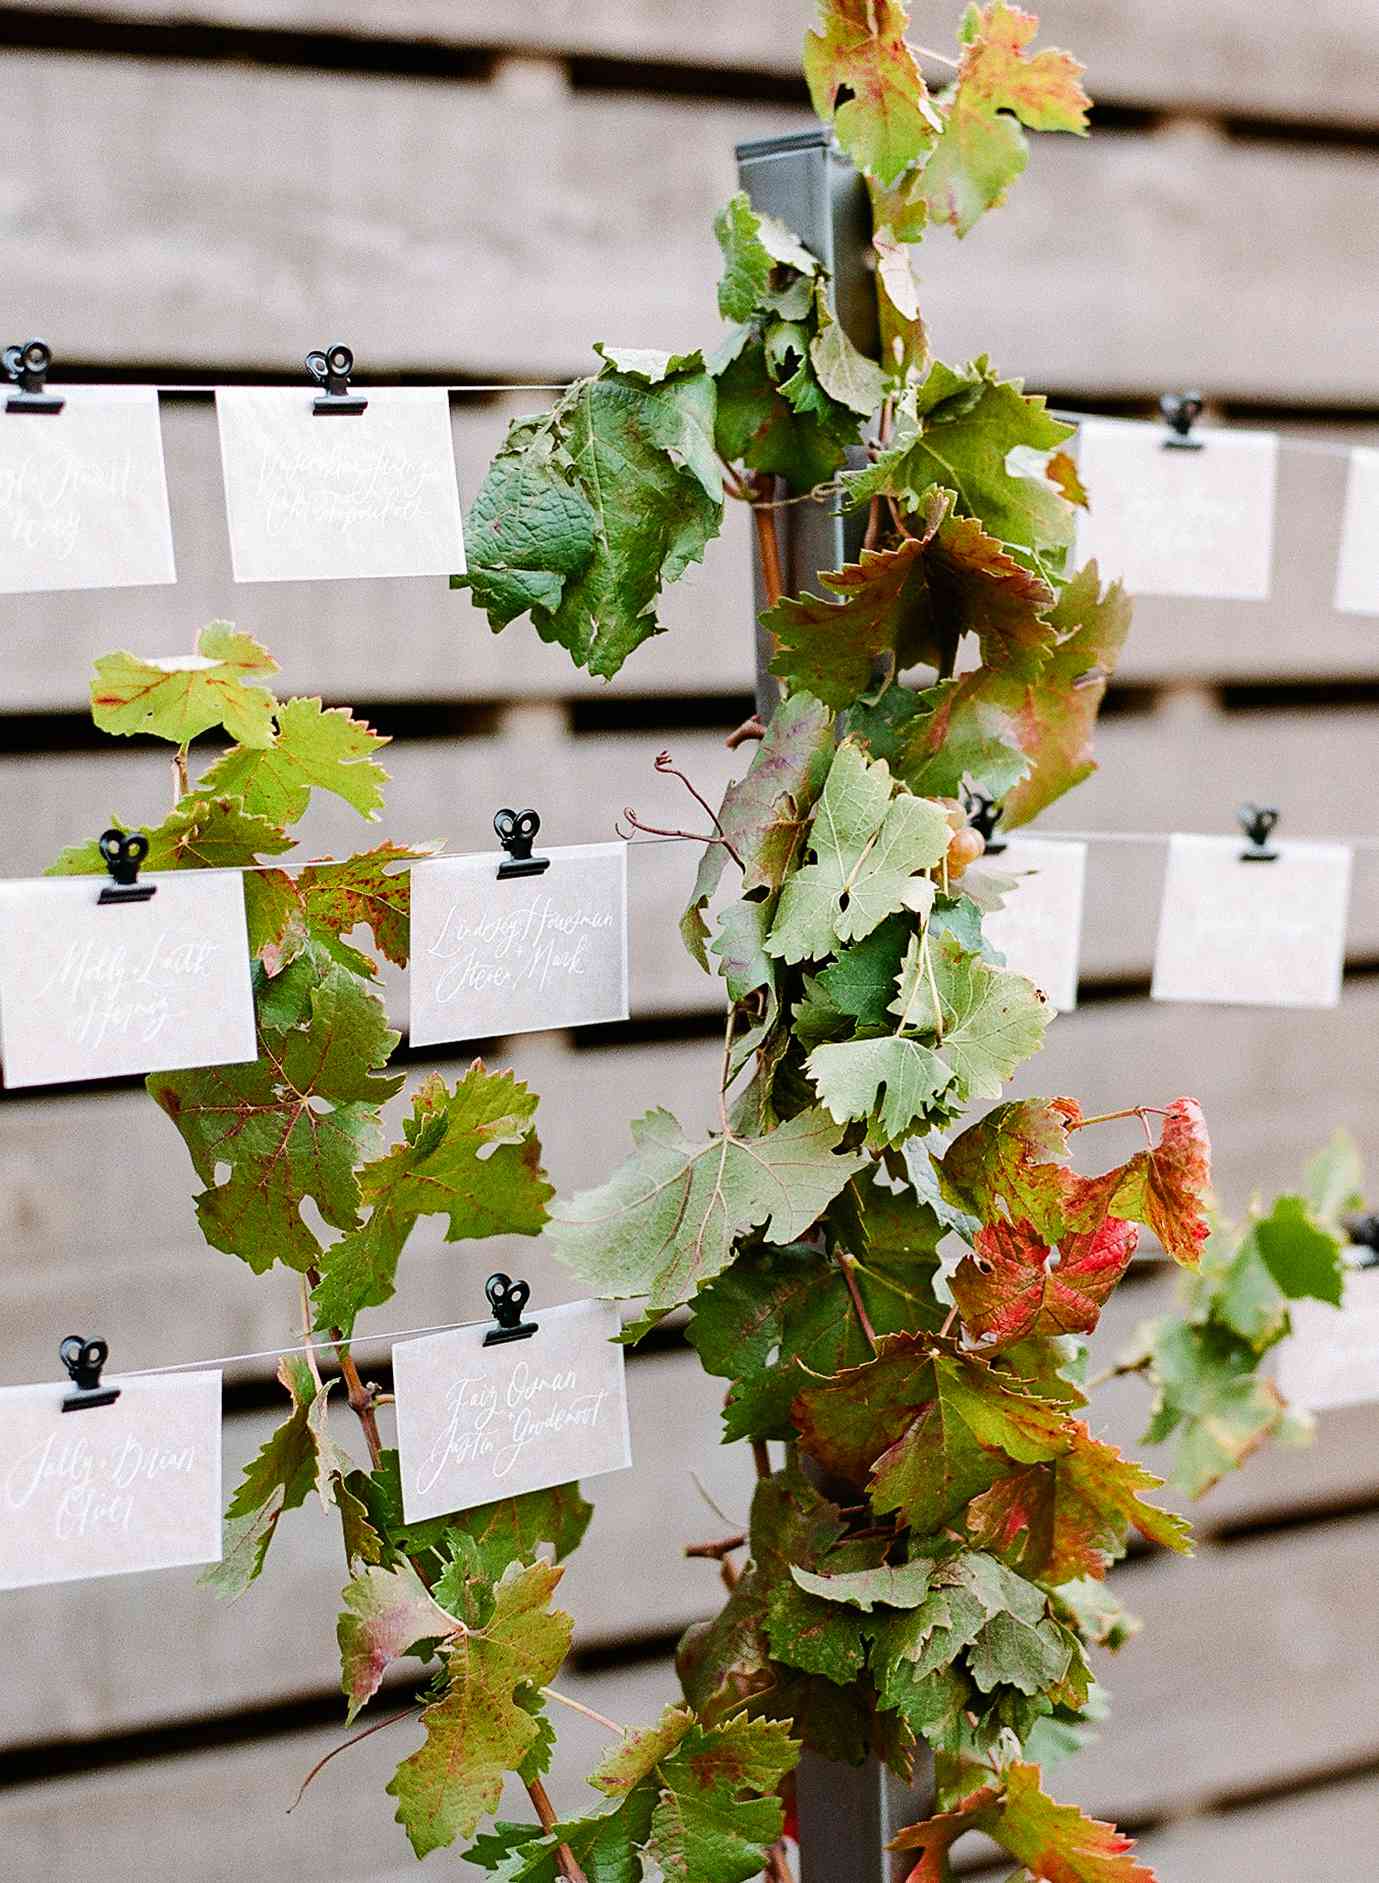 cristina chris wedding escort cards on lines with fall leaves